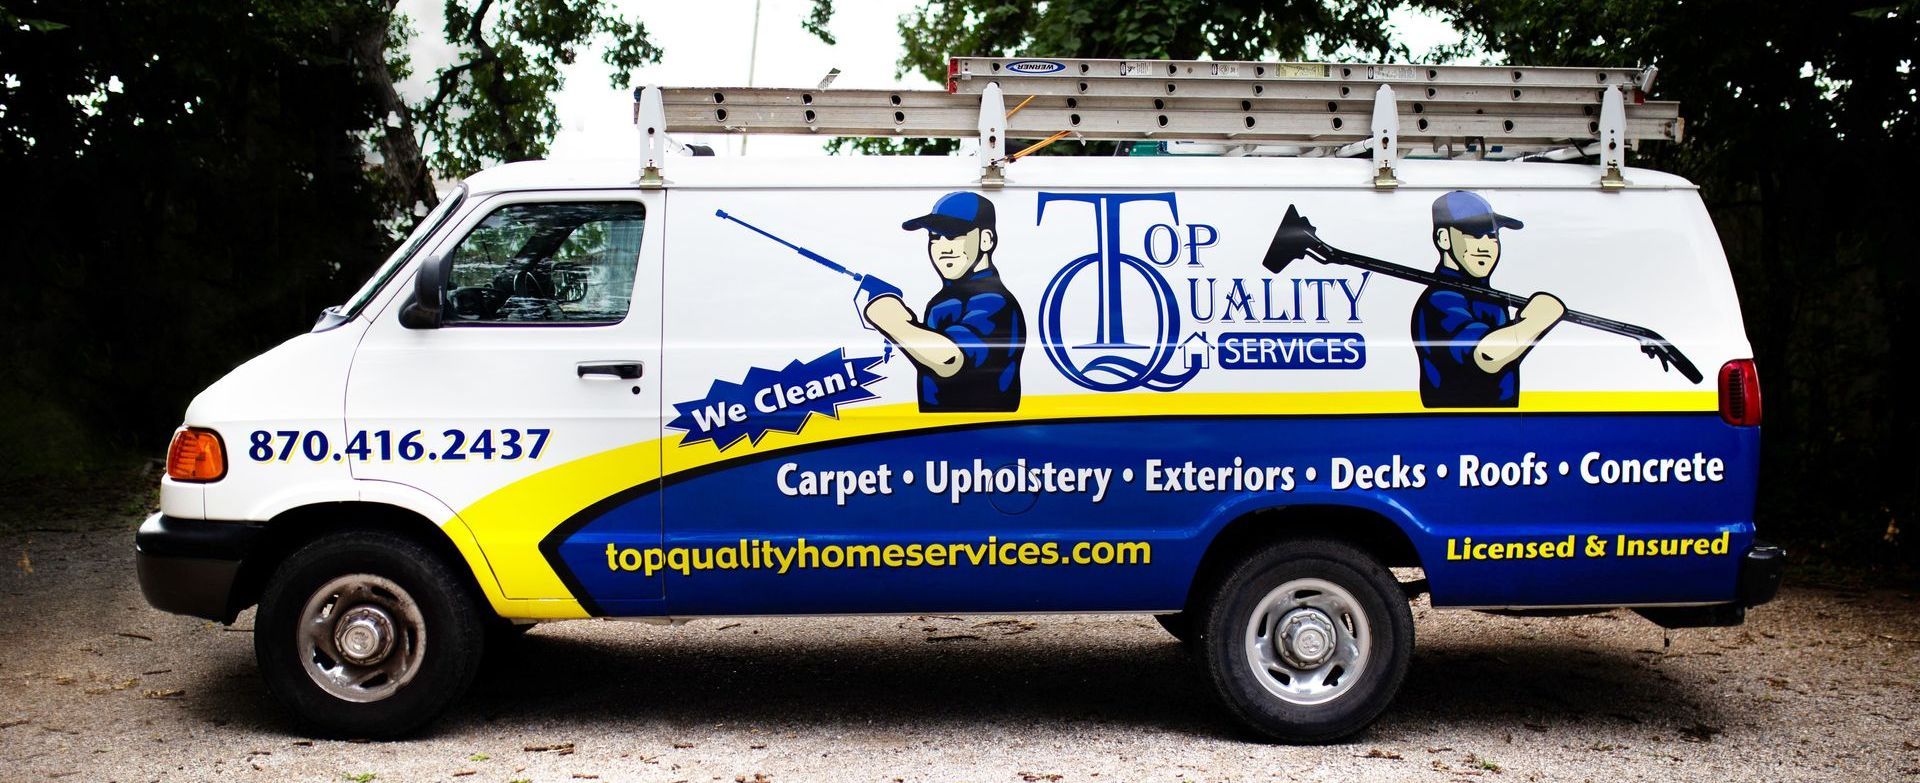 A van that says top quality on the side